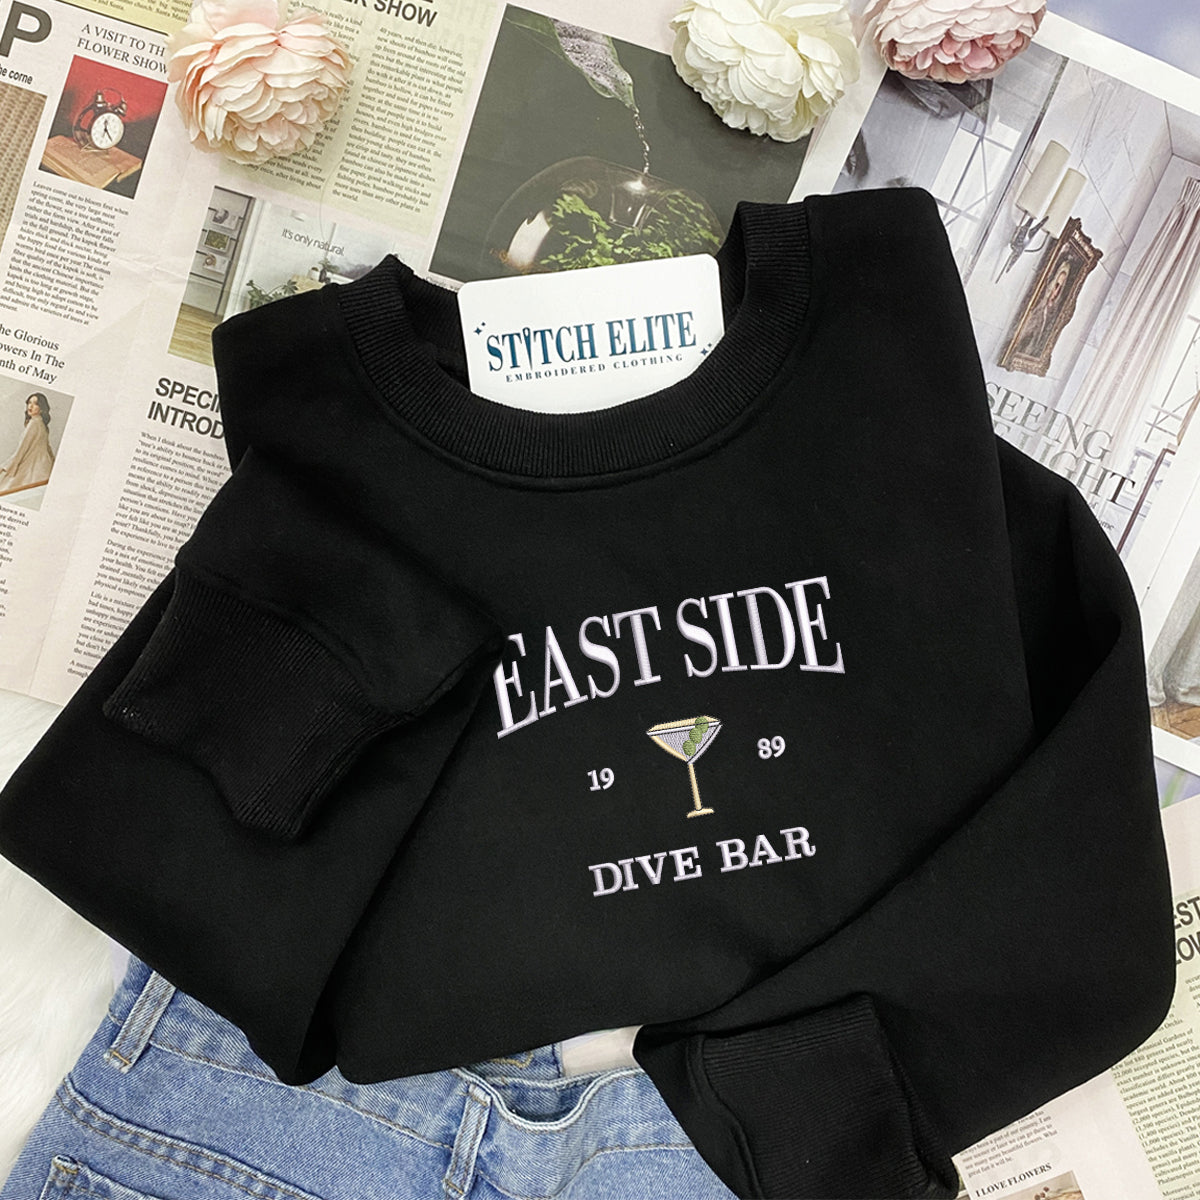 delicate reputation embroidered apparel 1708747506769.jpg